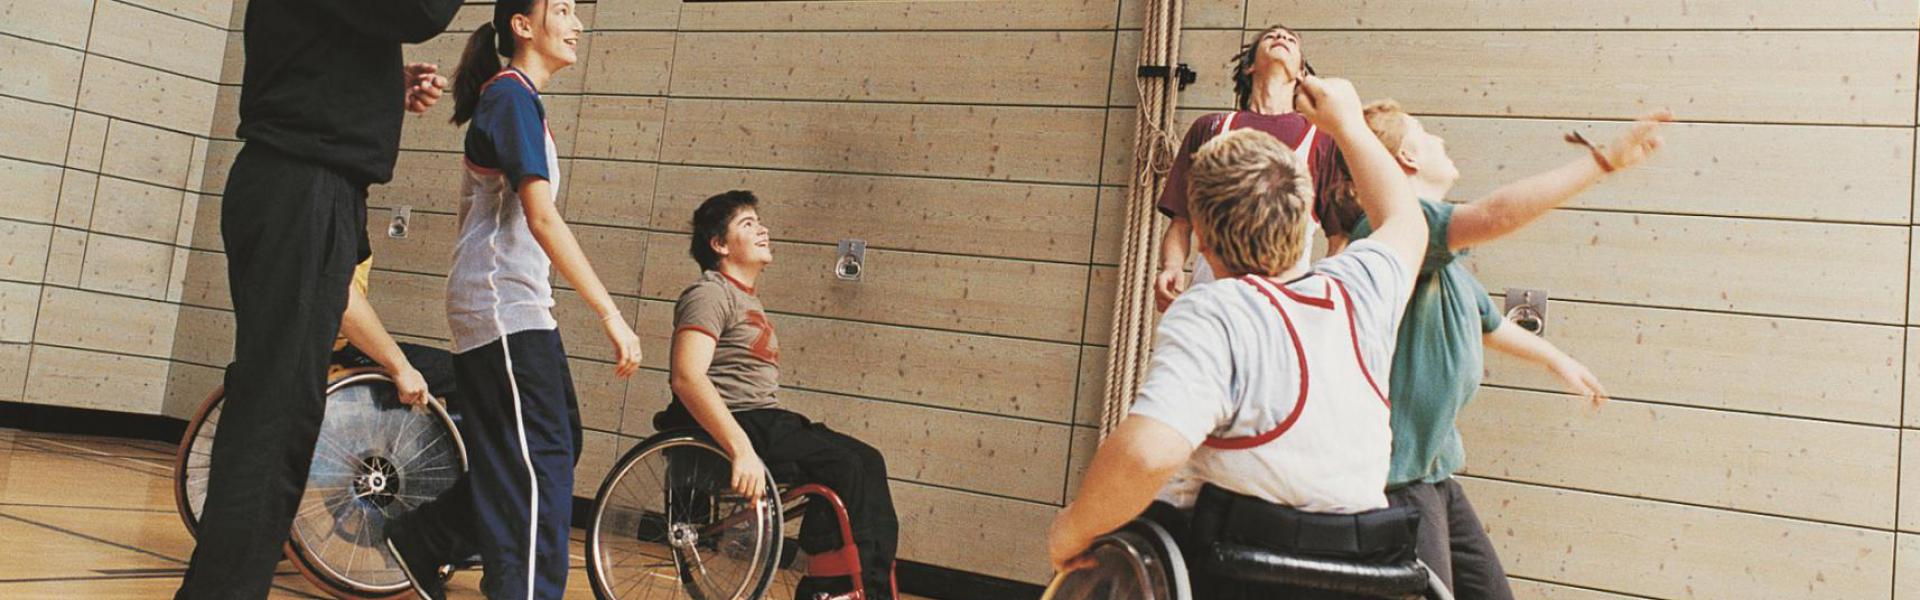 Students with disabilities playing basketball.